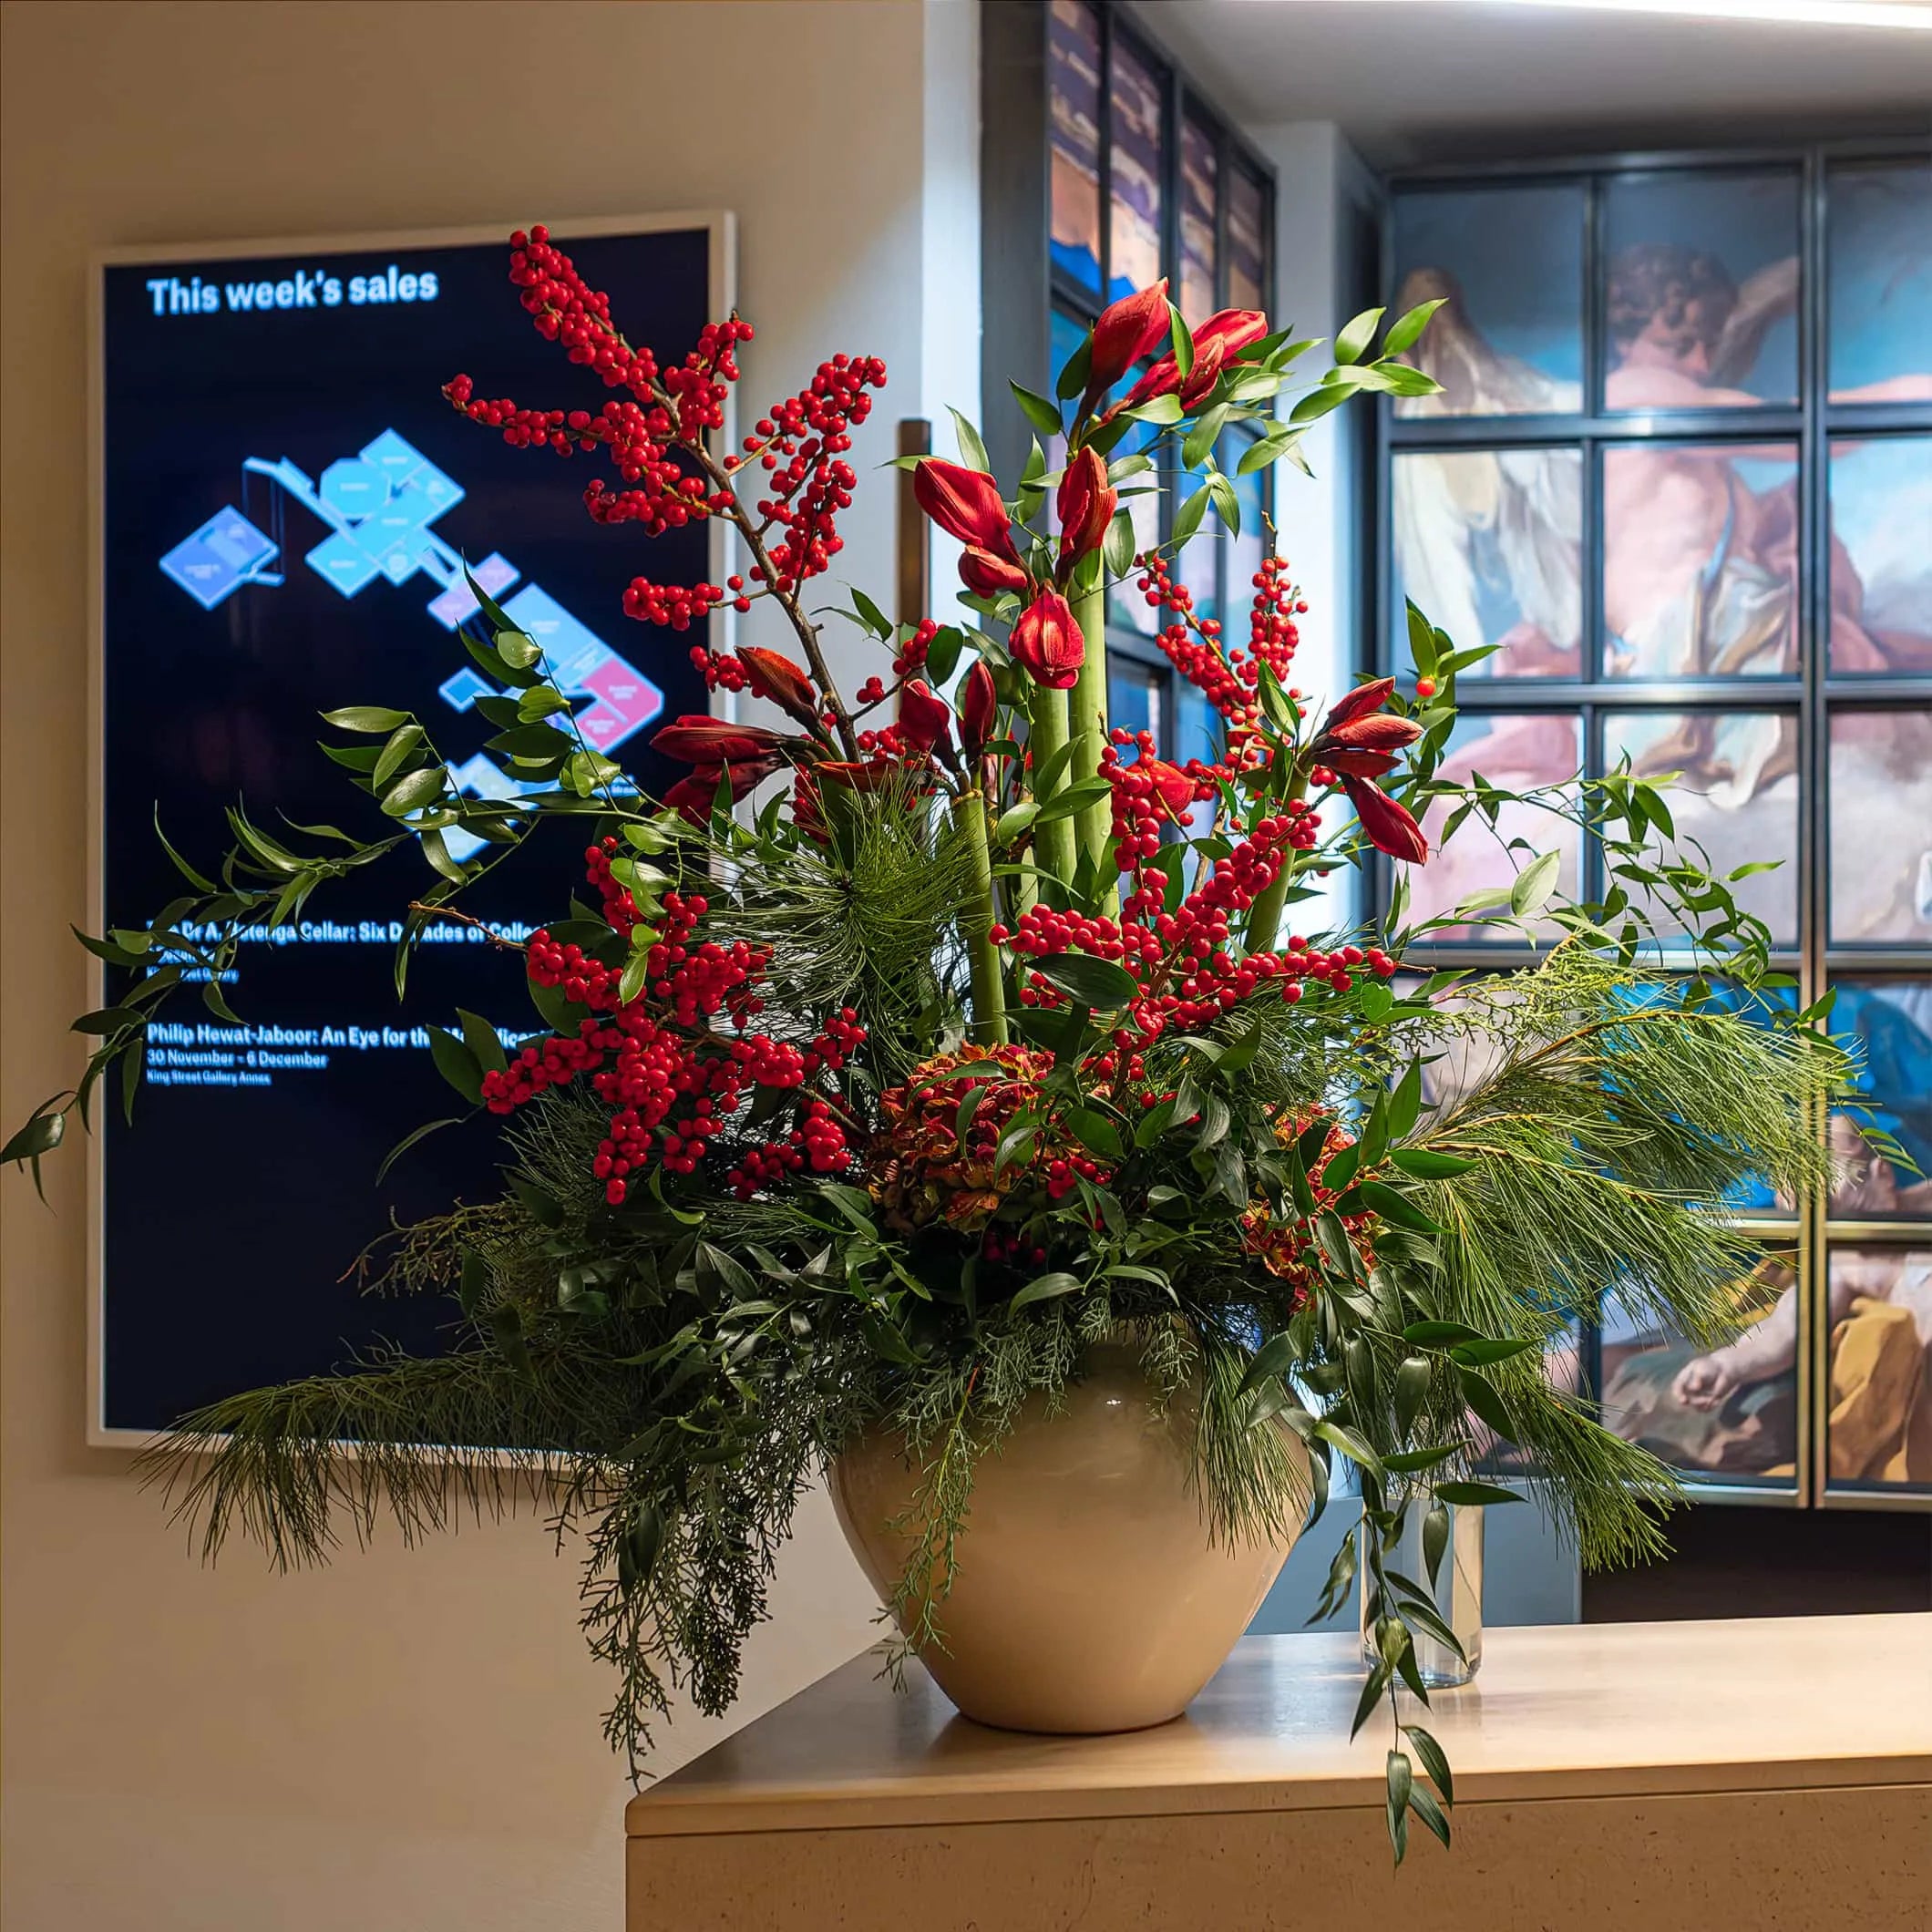 Bespoke Christmas Bouquet at the reception Desk at Christie's - designed and created by Amaranté London